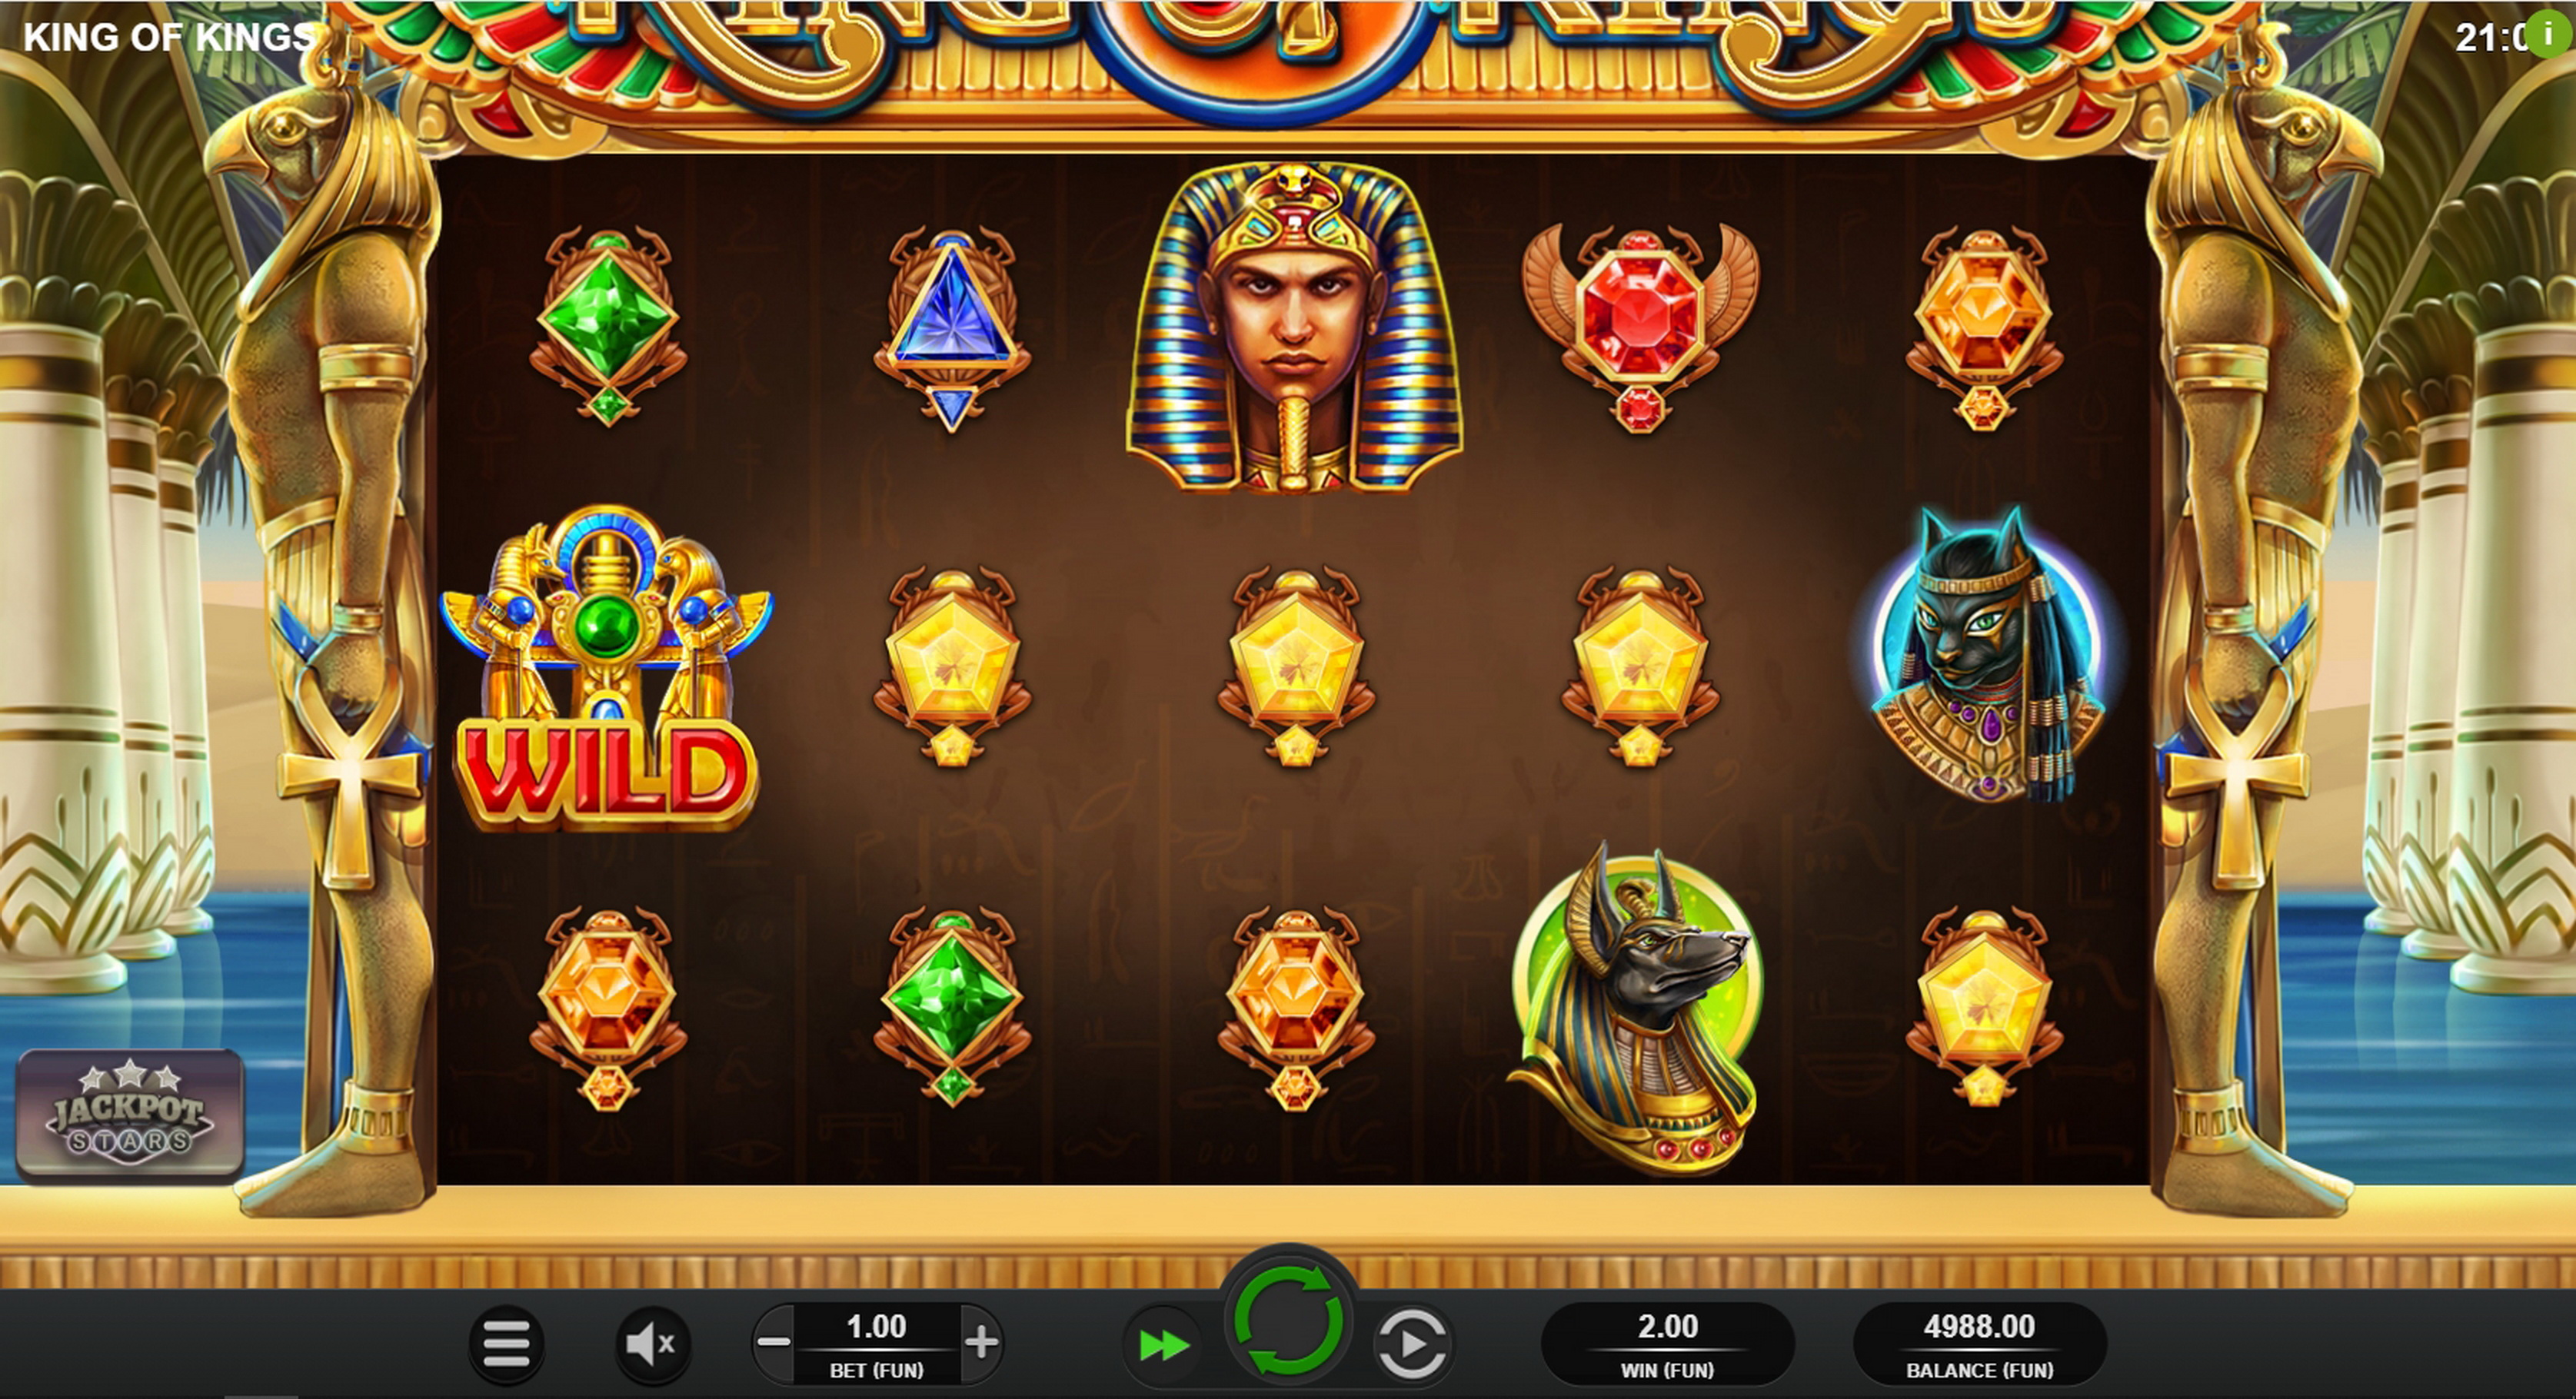 Win Money in King of Kings Free Slot Game by Relax Gaming